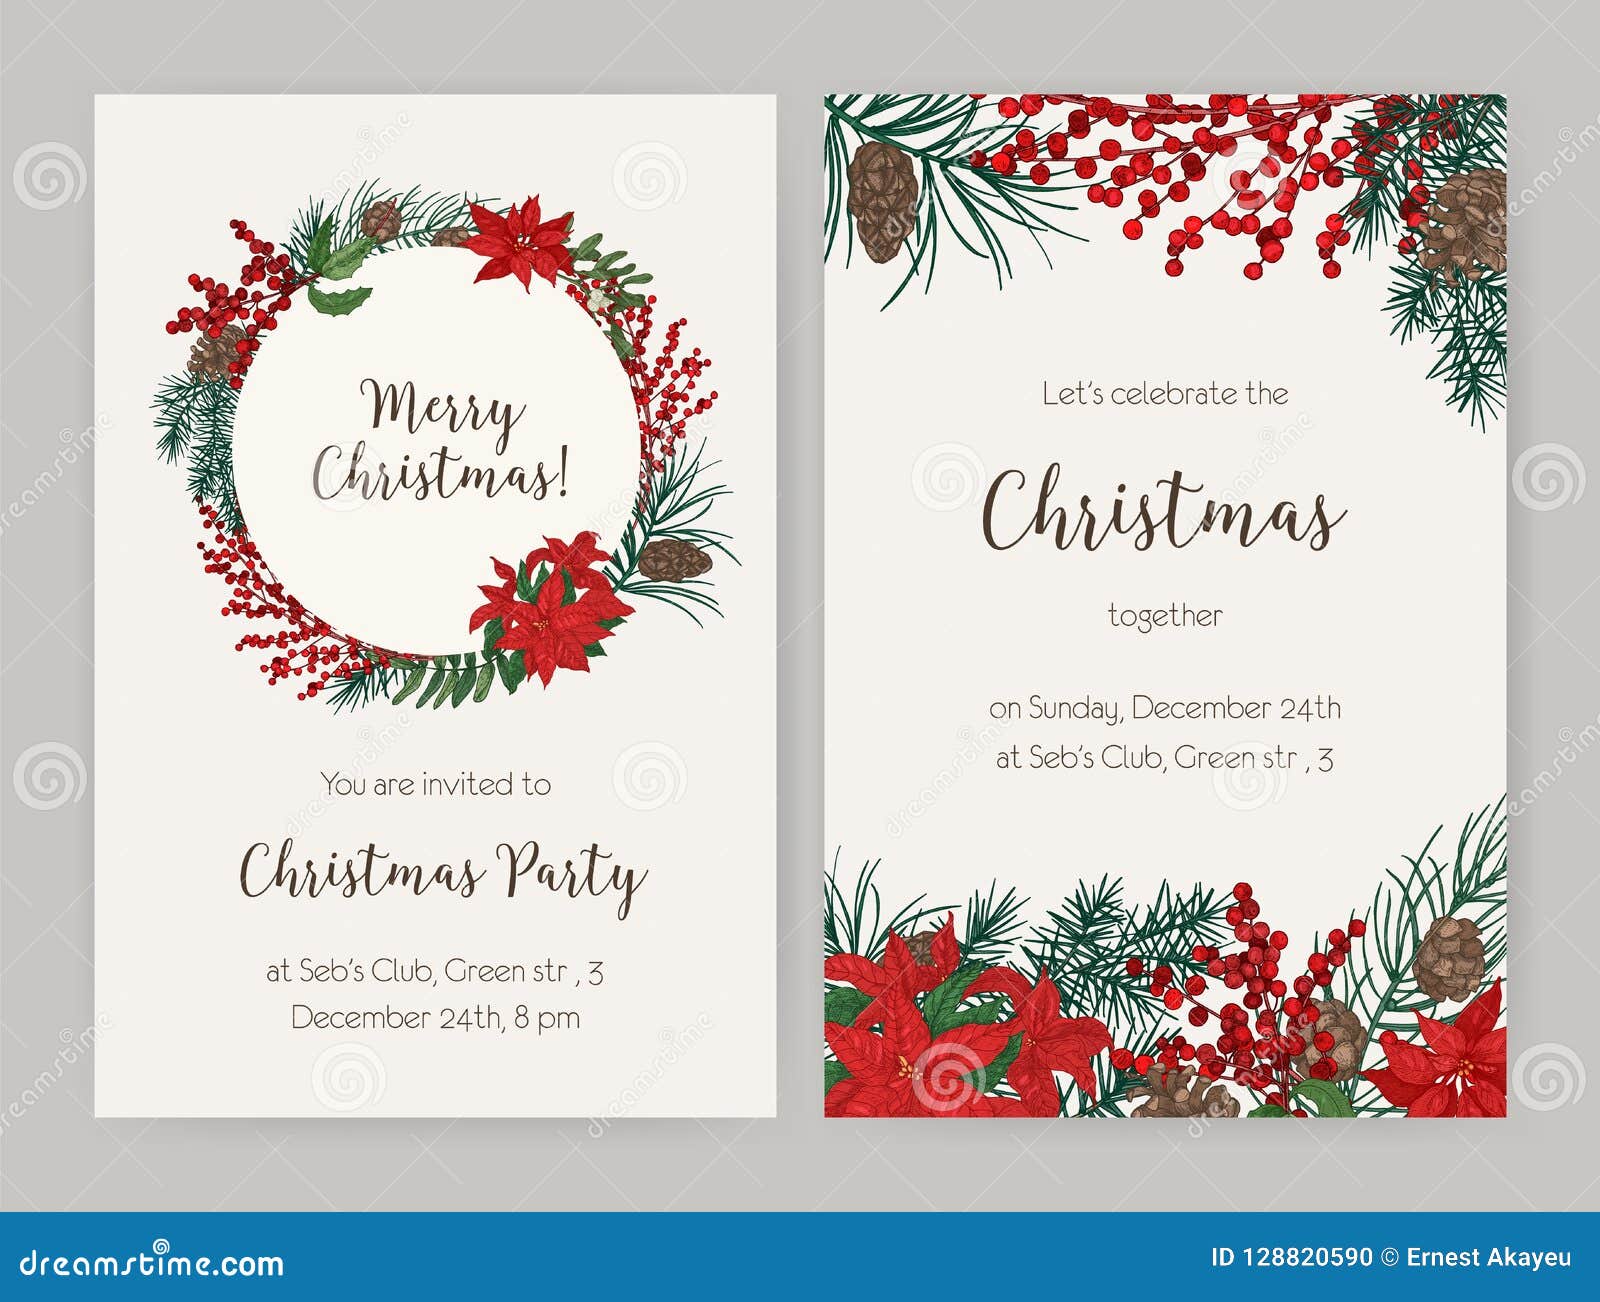 set of christmas flyer or party invitation templates decorated with coniferous tree branches and cones, holly leaves and